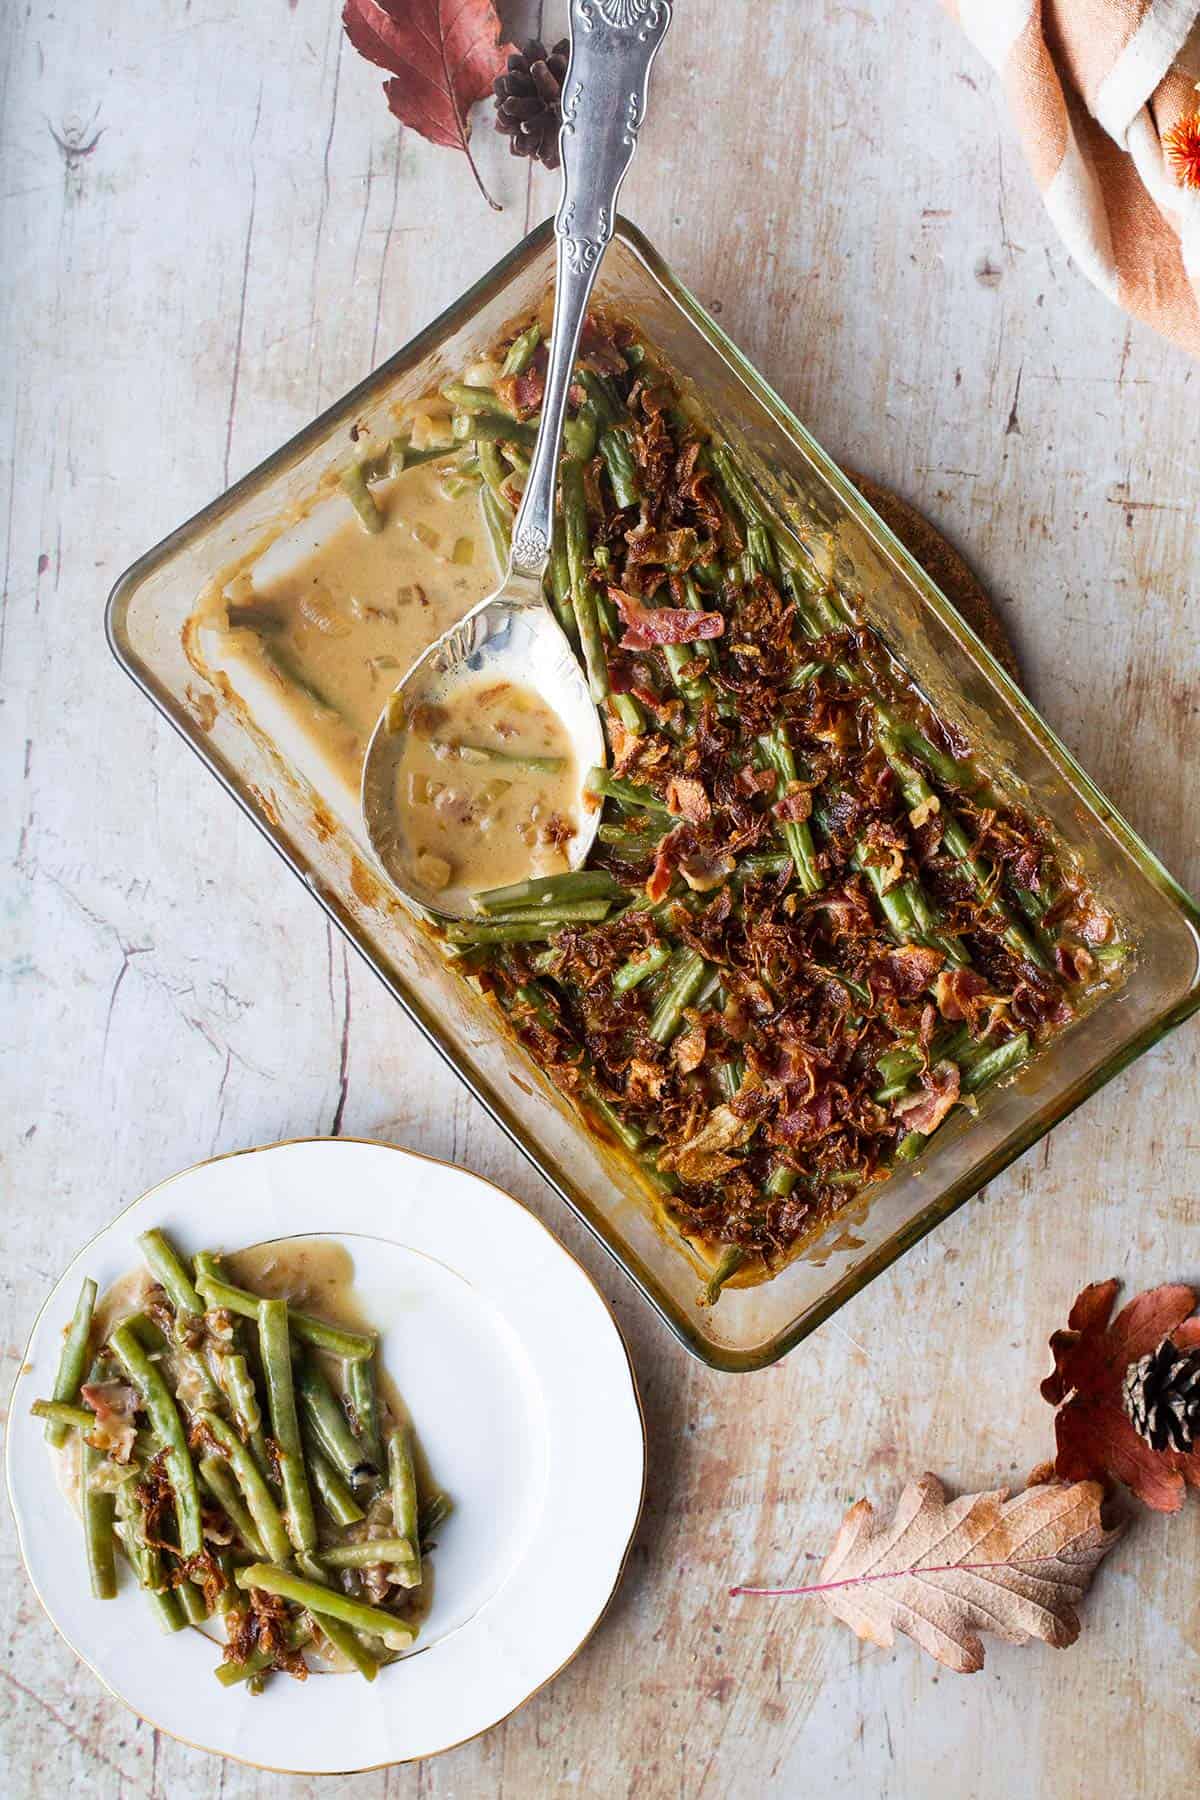 A large vintage spoon in the green bean casserole dish and one white plate for serving.